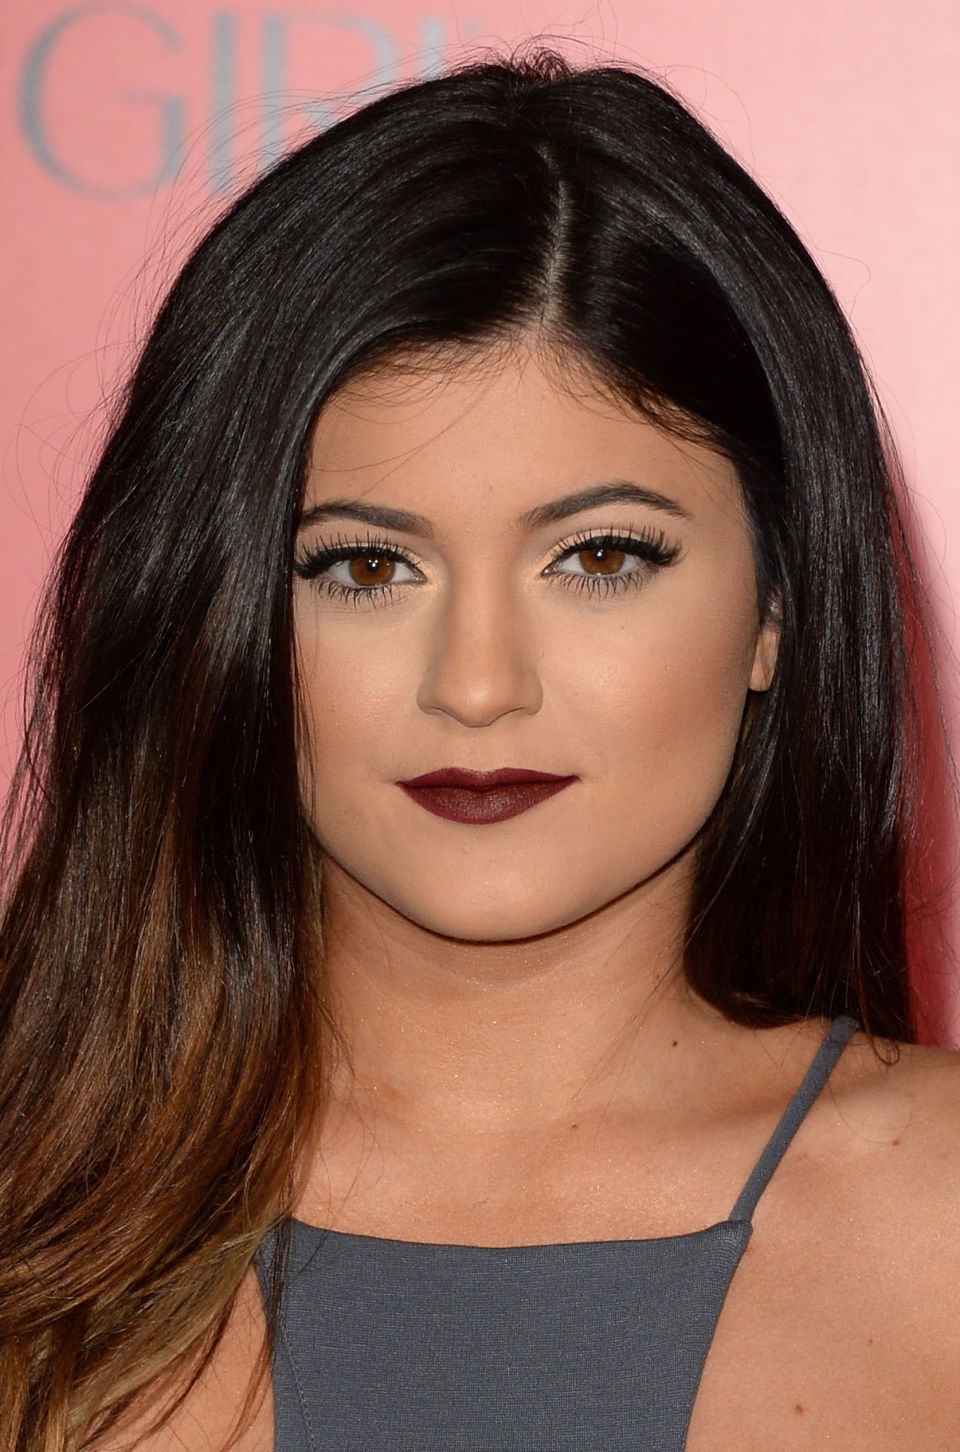 Kylie Jenner in anul 2013